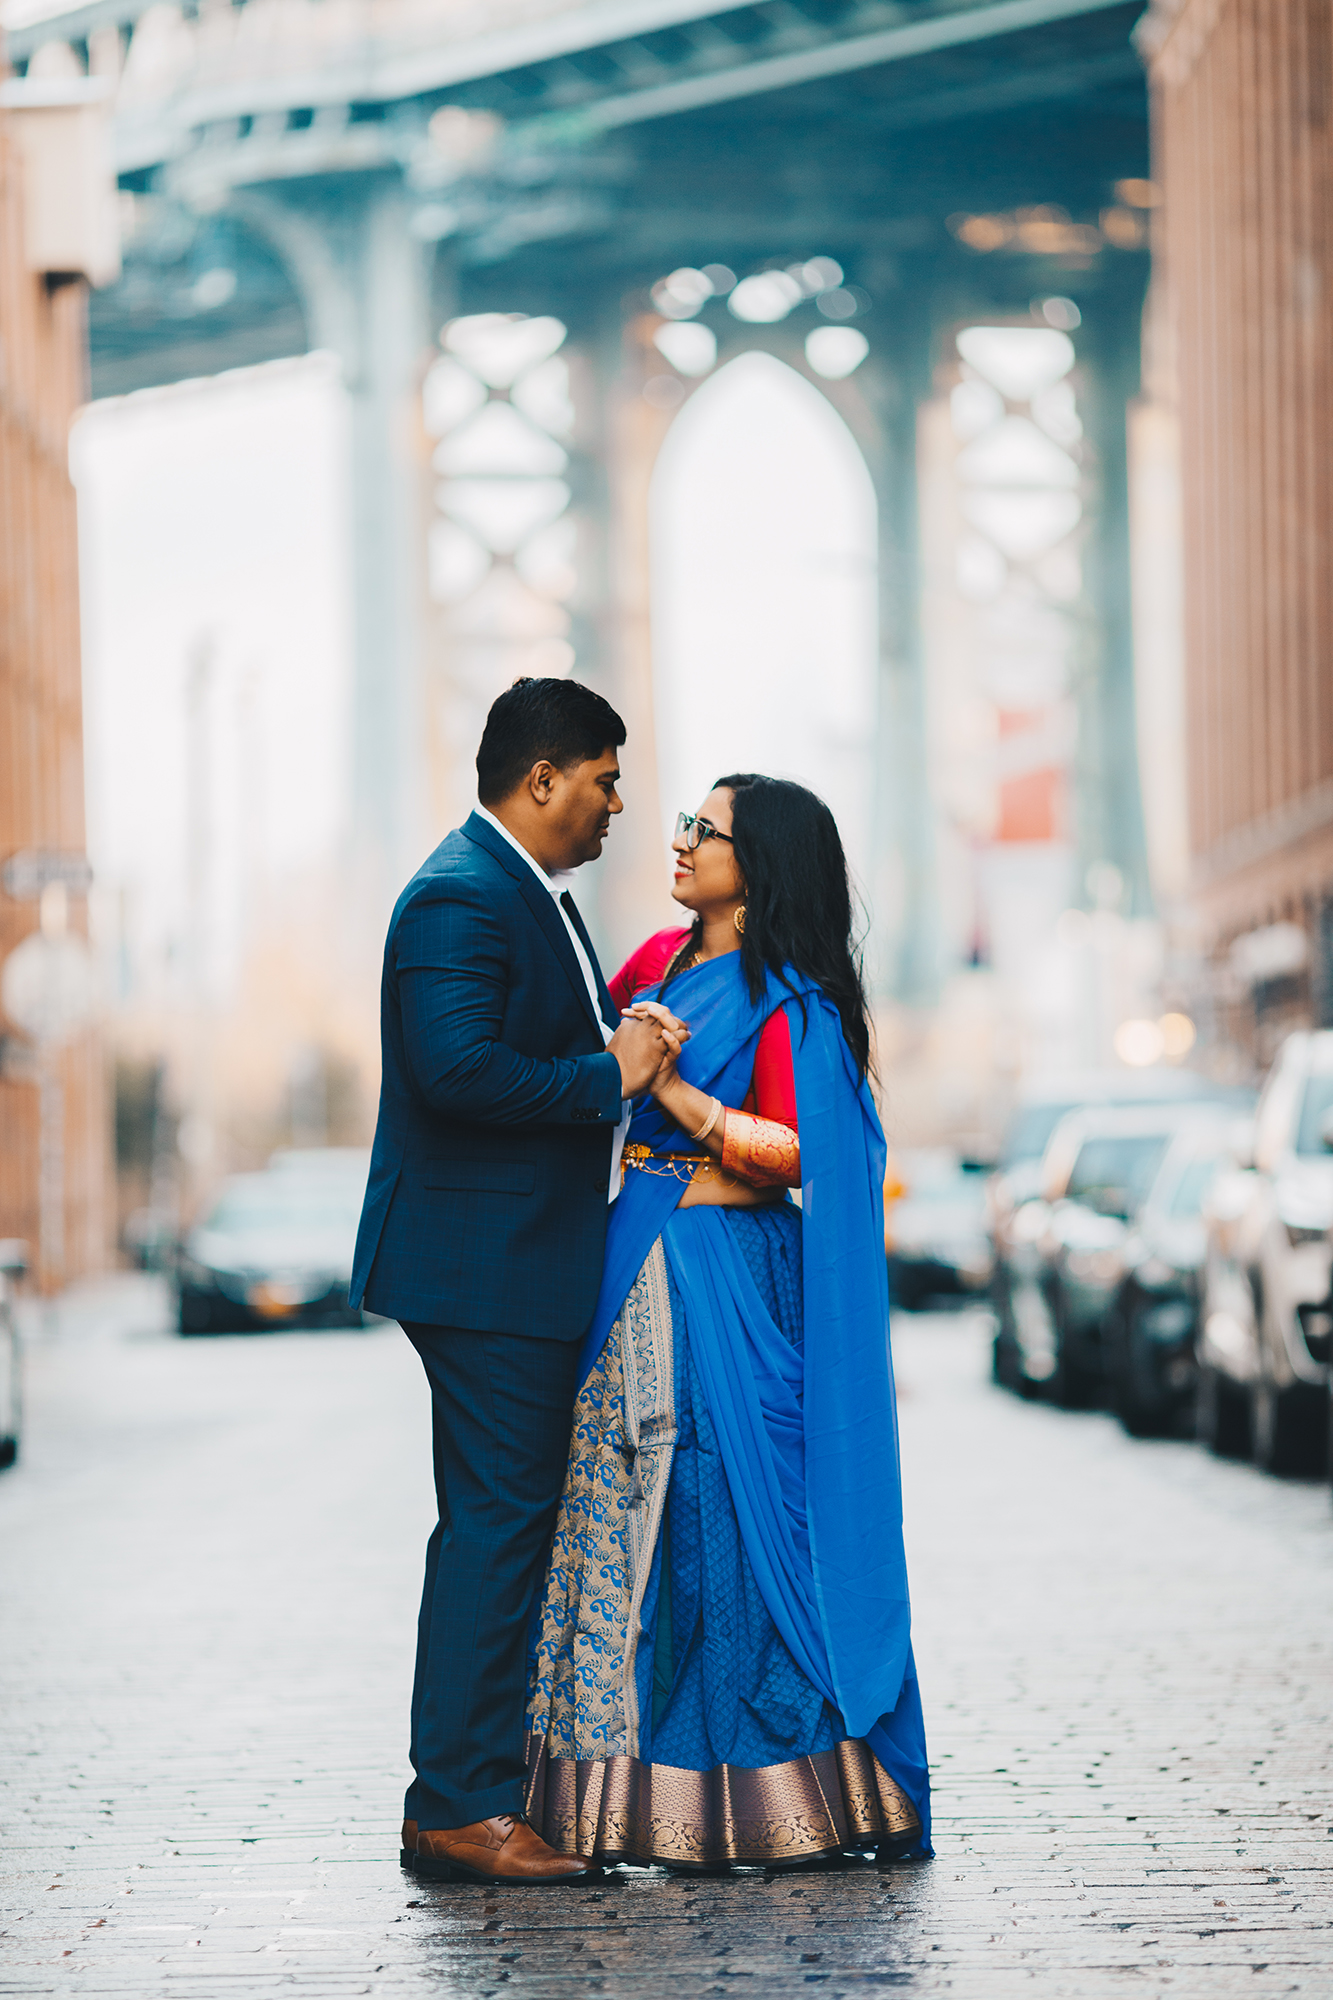 Adventure NYC Engagement Photos in Dumbo and Brooklyn Bridge Park